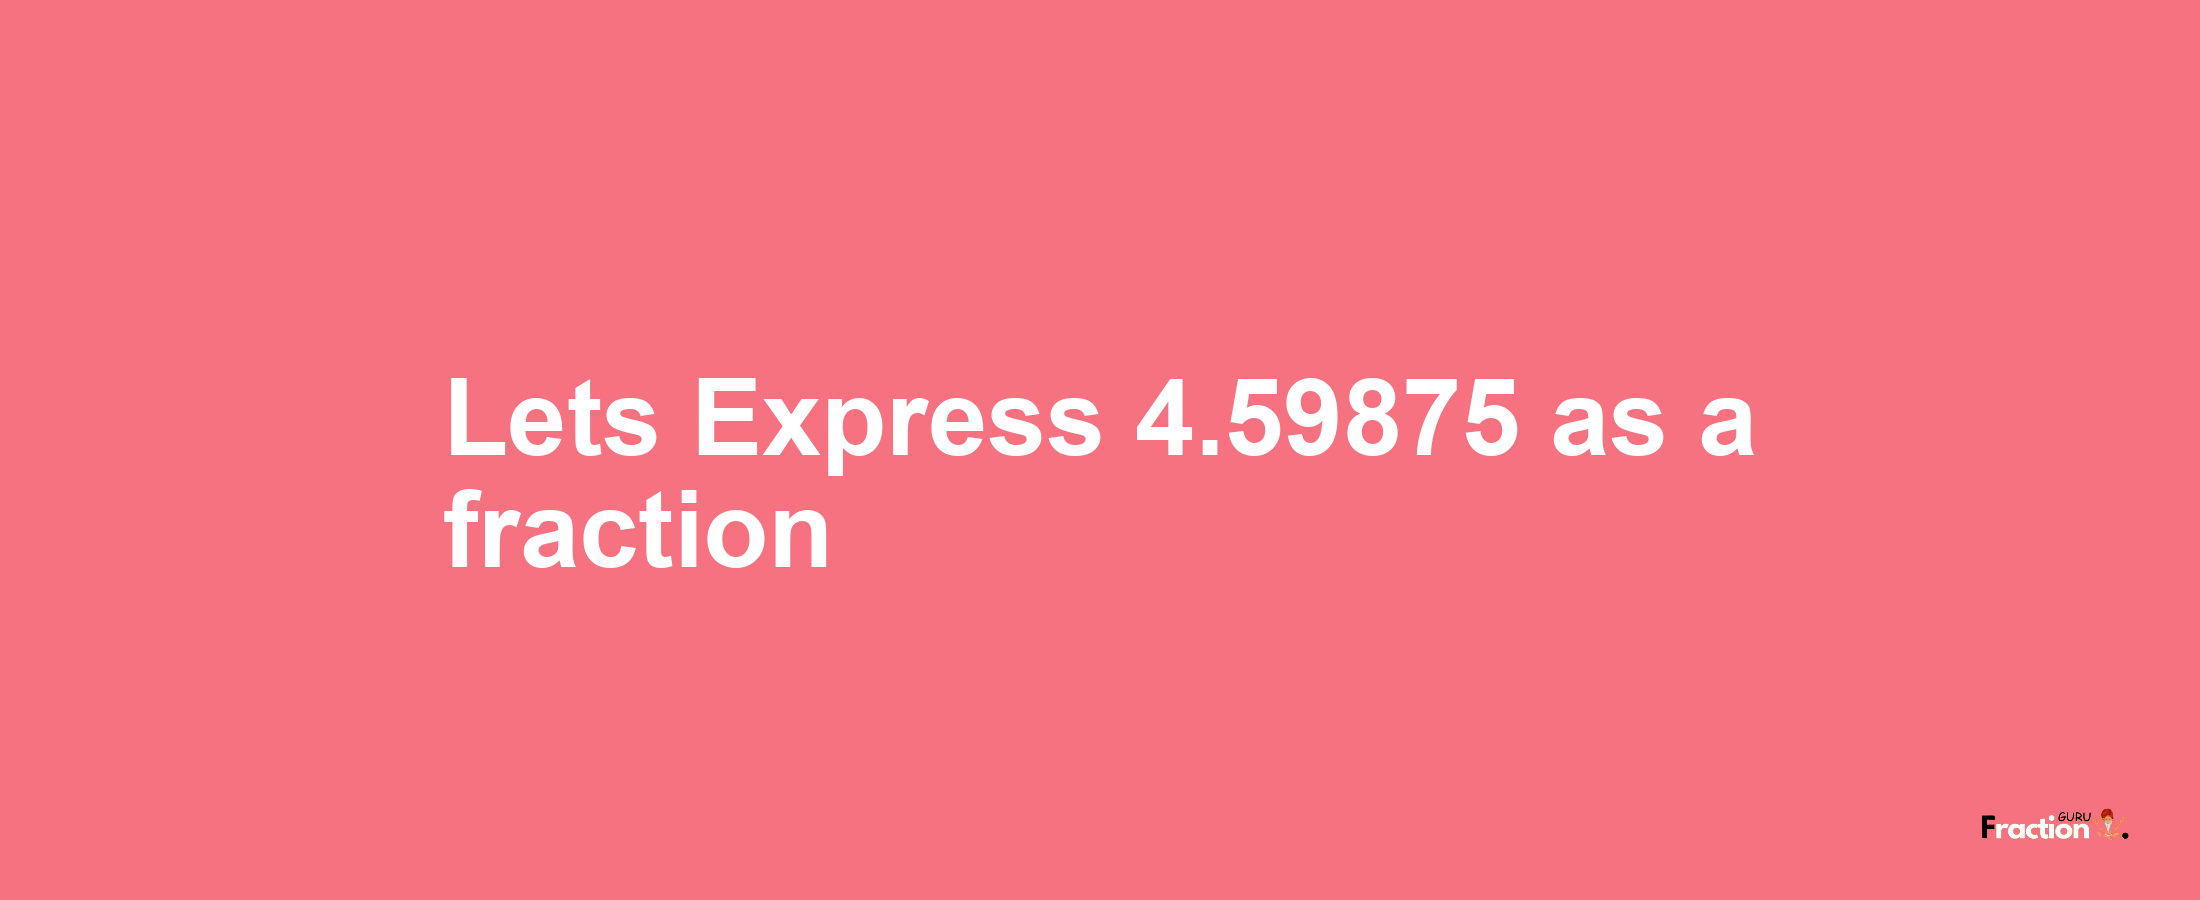 Lets Express 4.59875 as afraction